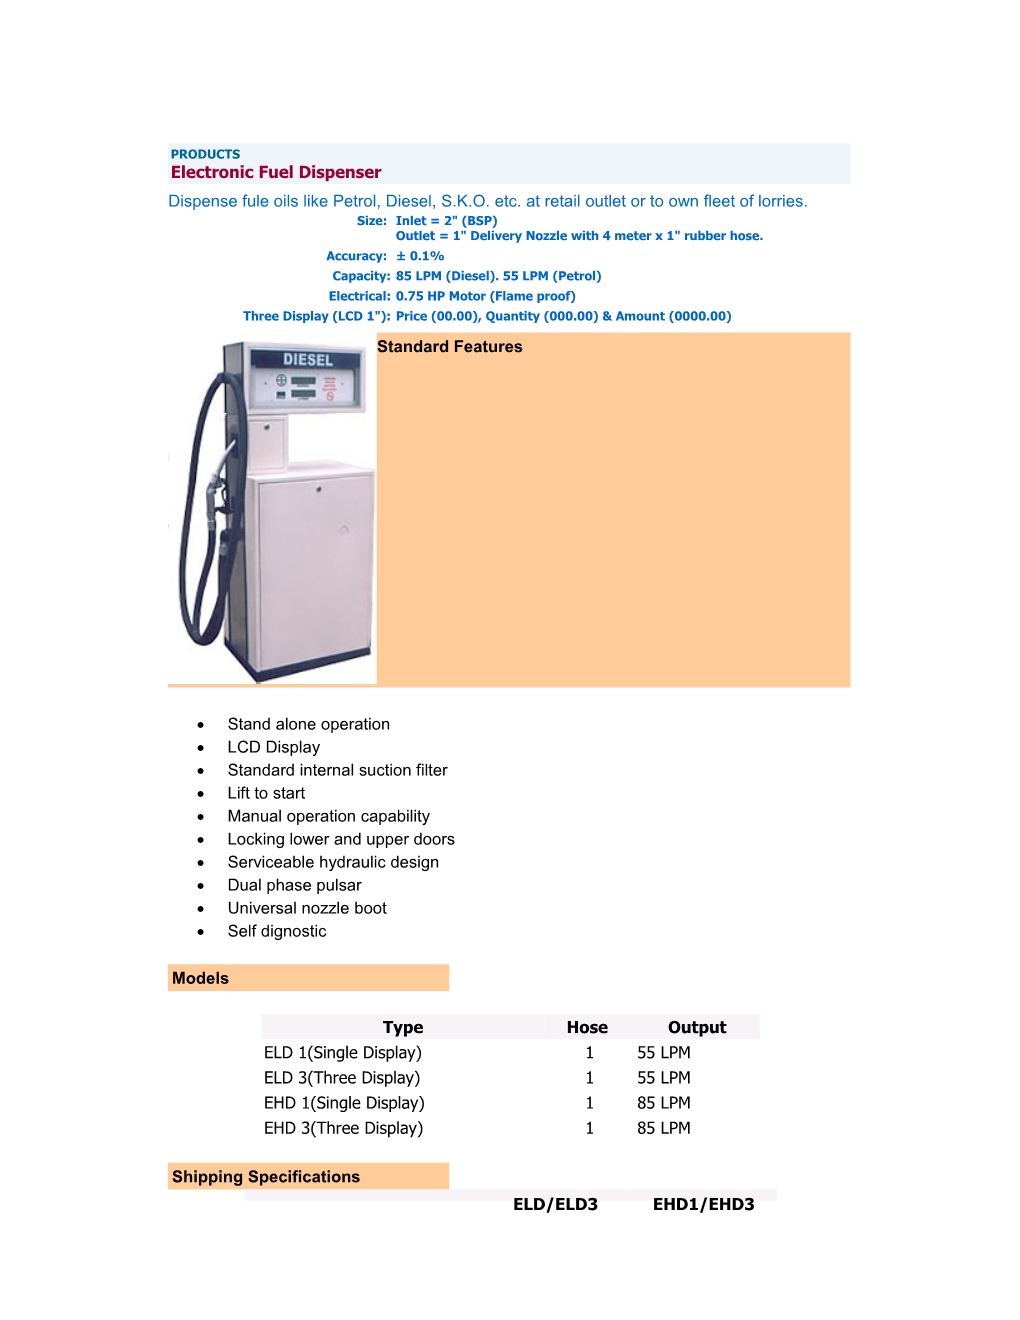 PRODUCTS Electronic Fuel Dispenser